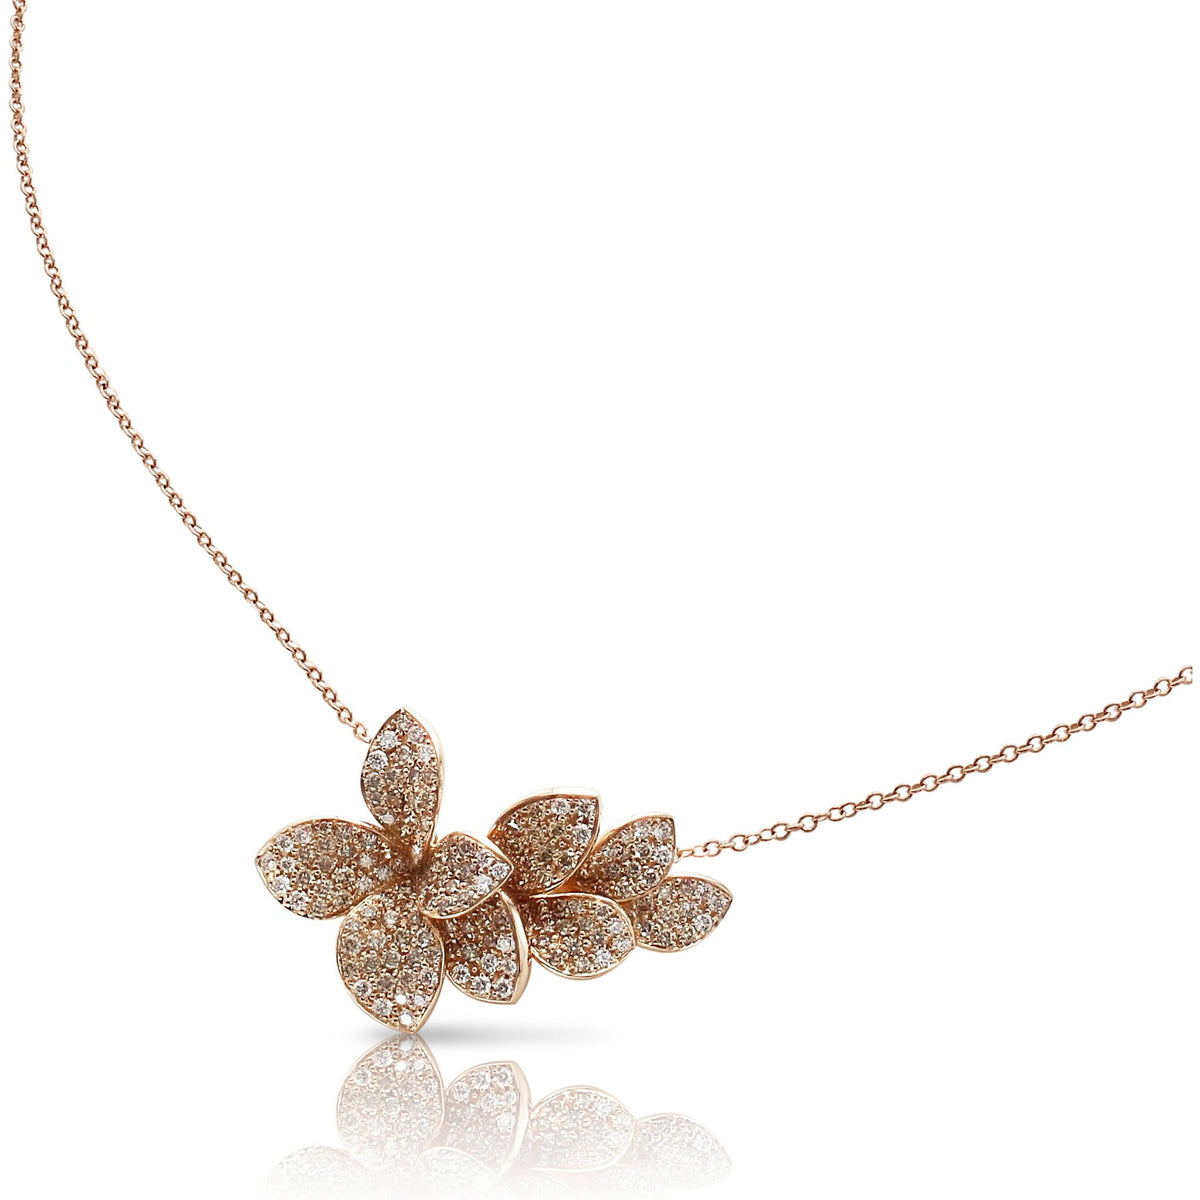 Pasquale Bruni - Stella in Fiore Necklace in 18k Rose Gold with White and Champagne Diamonds